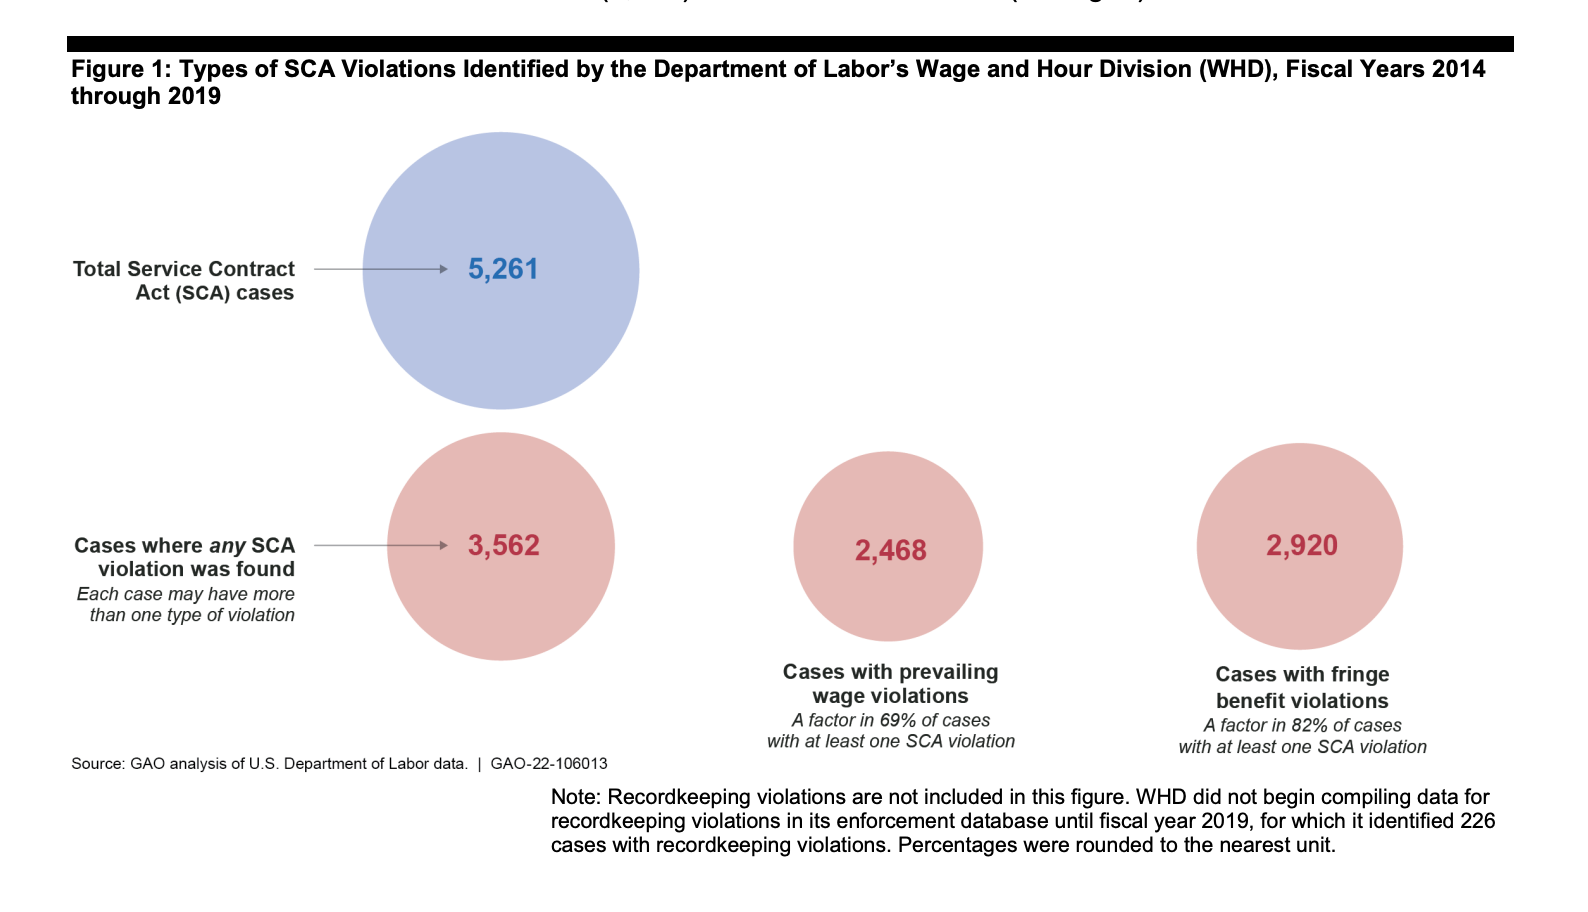 Figure 1: Types of SCA Violations Identified by the Department of Labor’s Wage and Hour Division (WHD), Fiscal Years 2014 through 2019